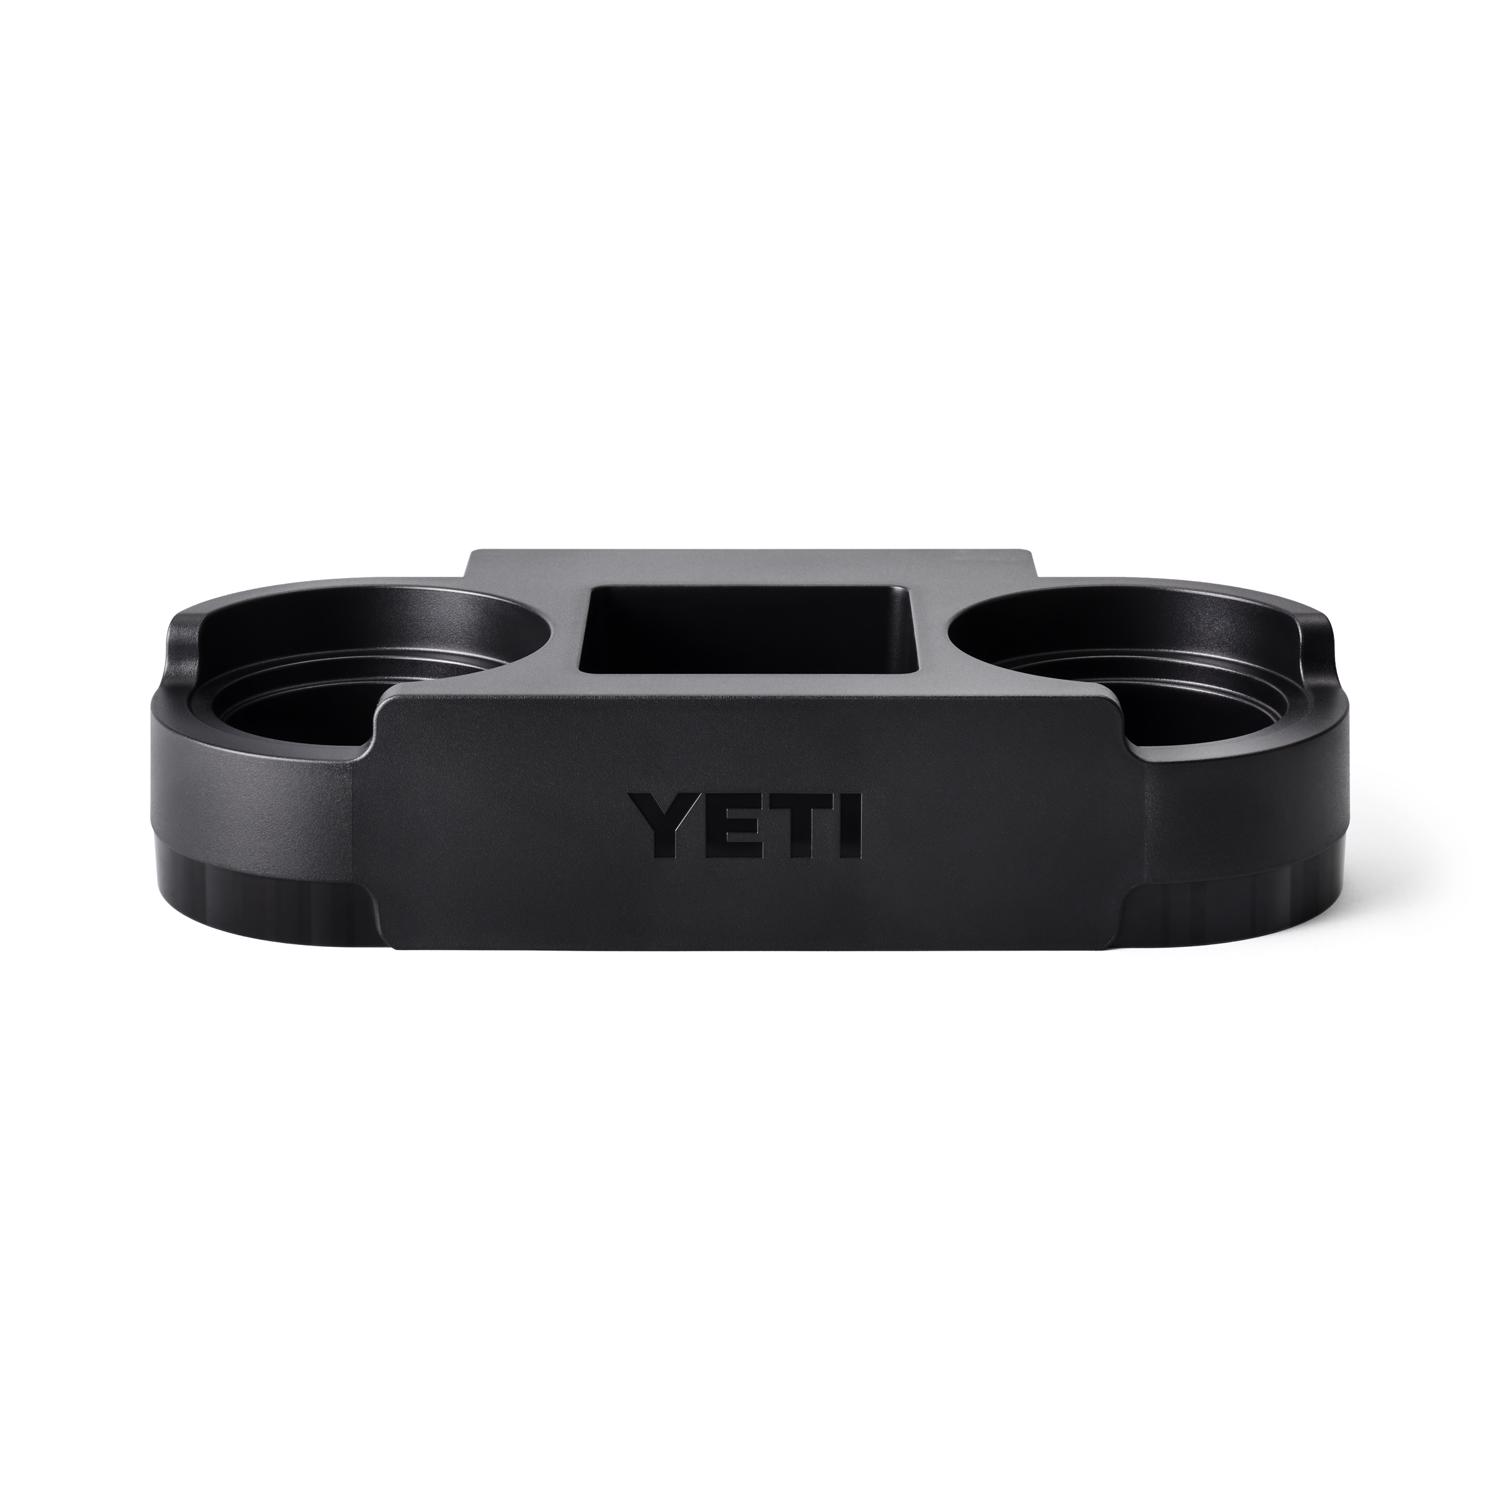 Photos - Other Garden Equipment Yeti Roadie Wheeled Cooler Cup Caddy Black 1 pk 20020020021 